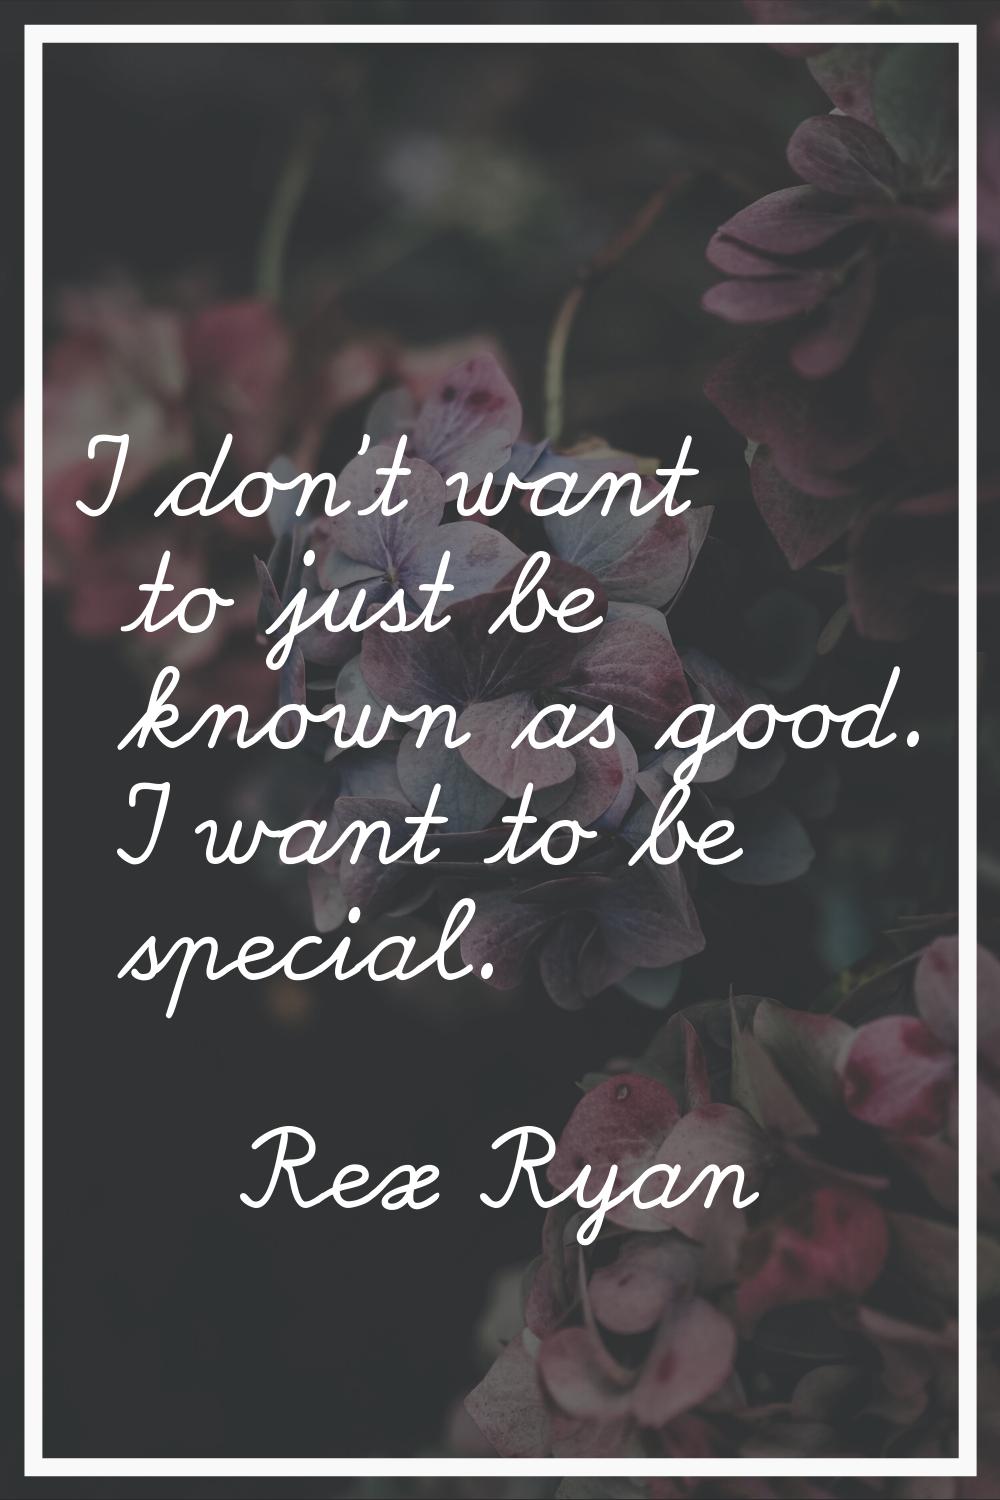 I don't want to just be known as good. I want to be special.